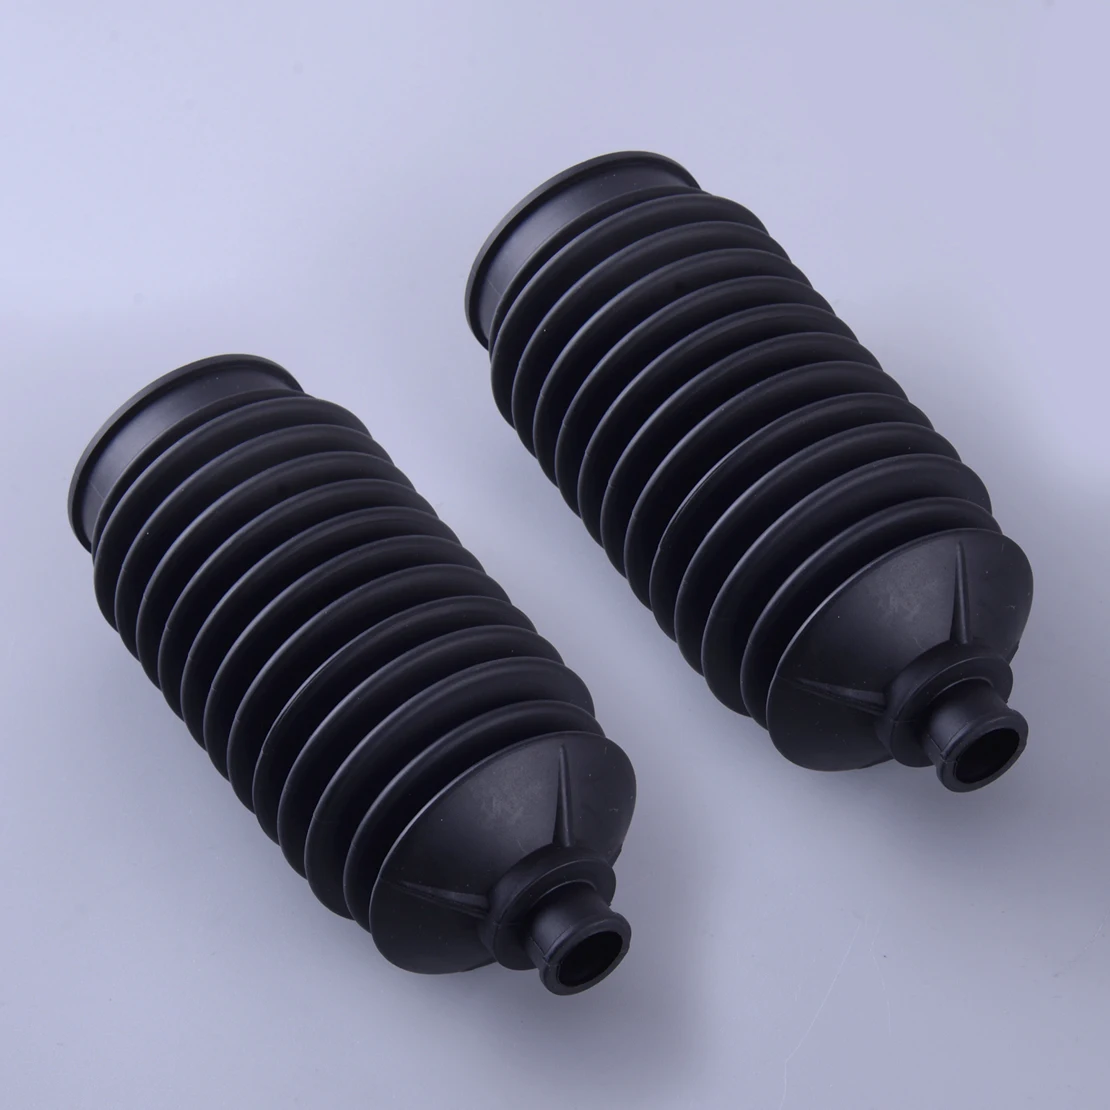 

1013035 2pcs Steering Bellows Long Rack Dust Boot Fit for Golf Cart Club Car DS 1984 1985 1986 1987 1988 1989-1996 Black Rubber